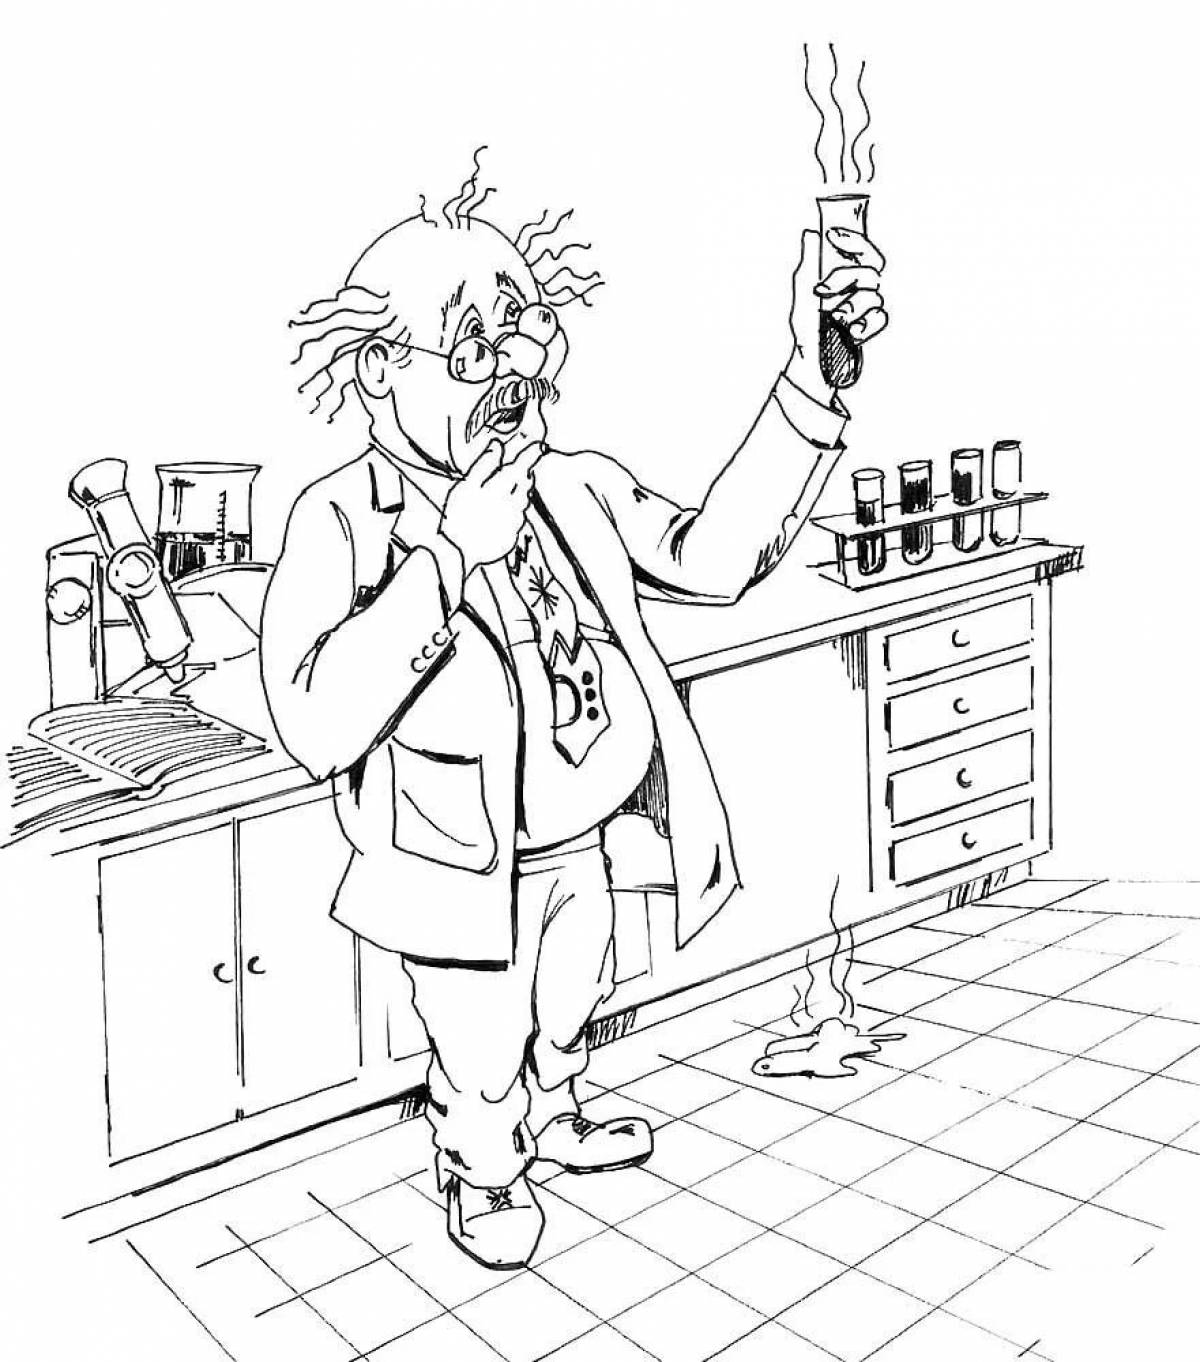 Scientists for kids #4